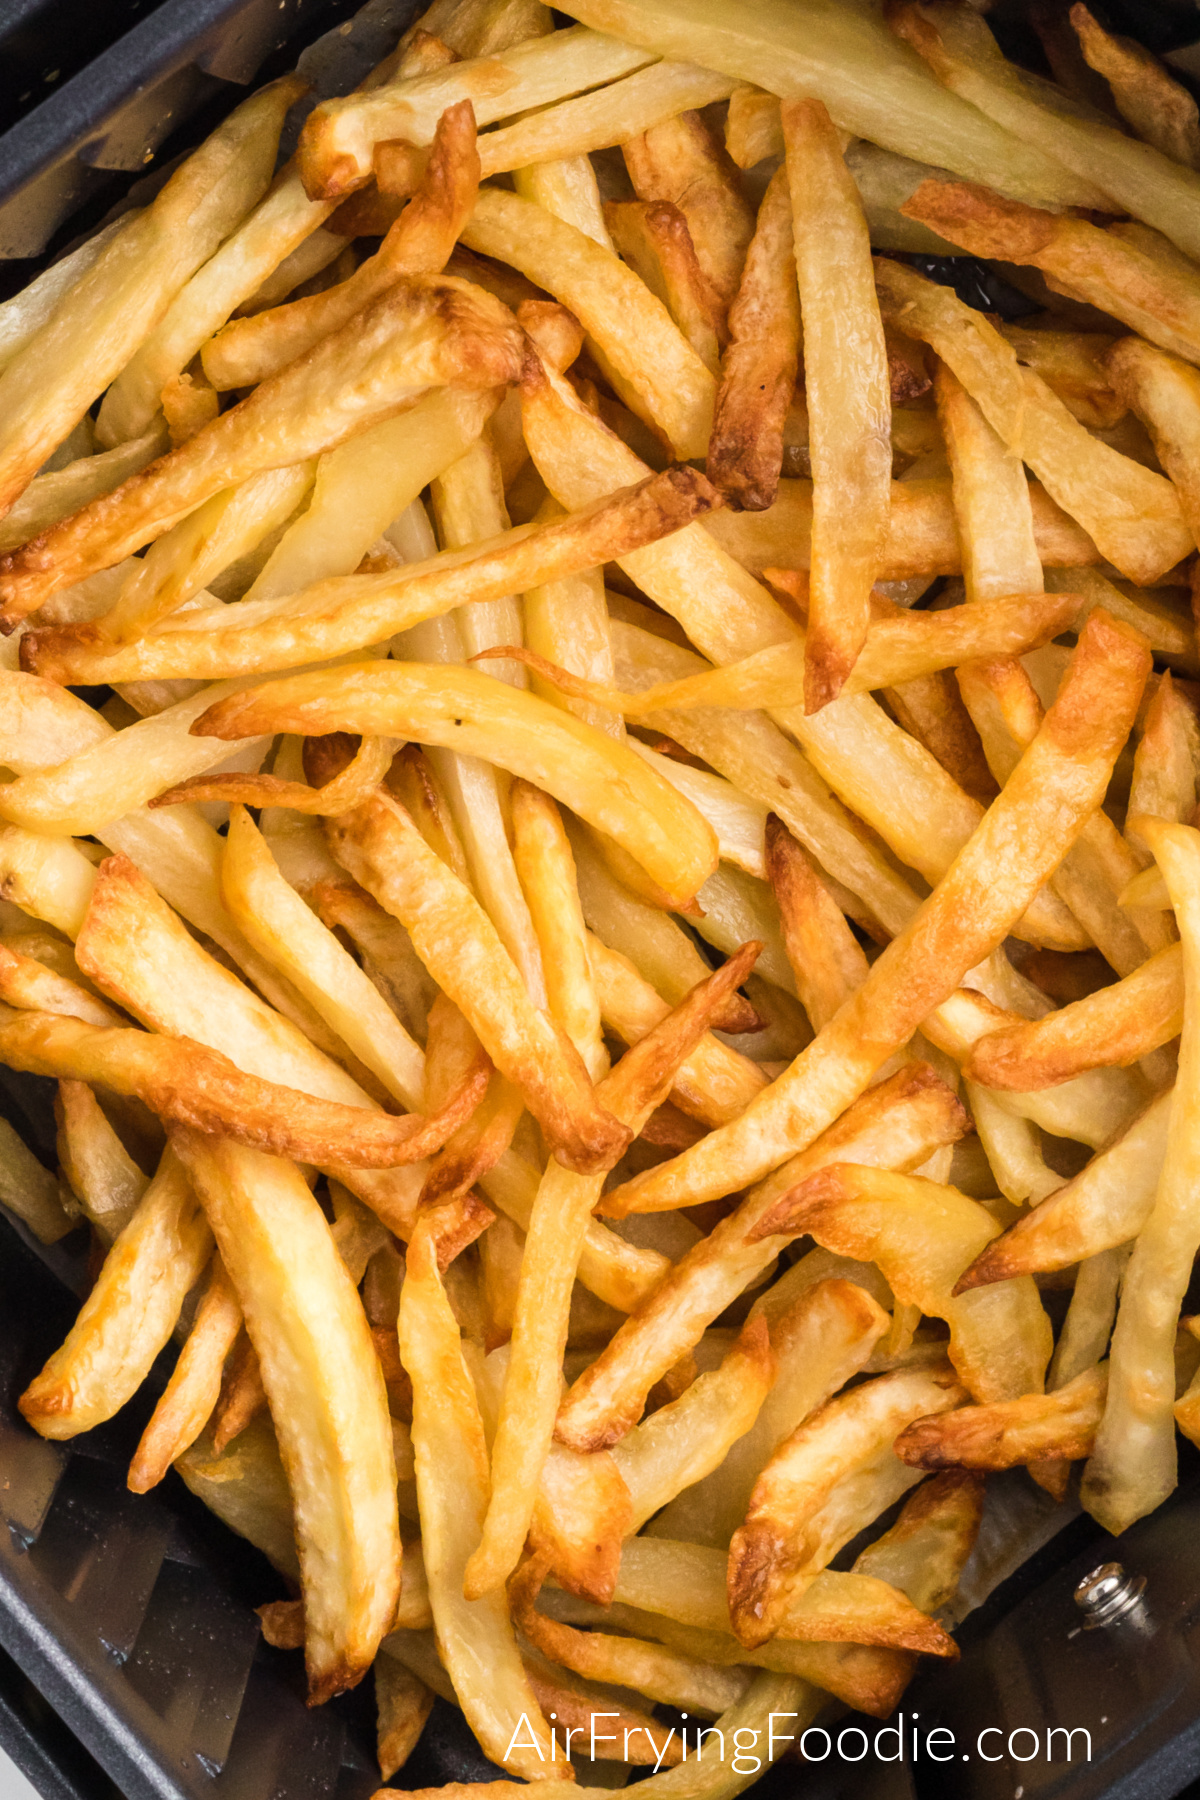 Reheated fries in the air fryer basket.